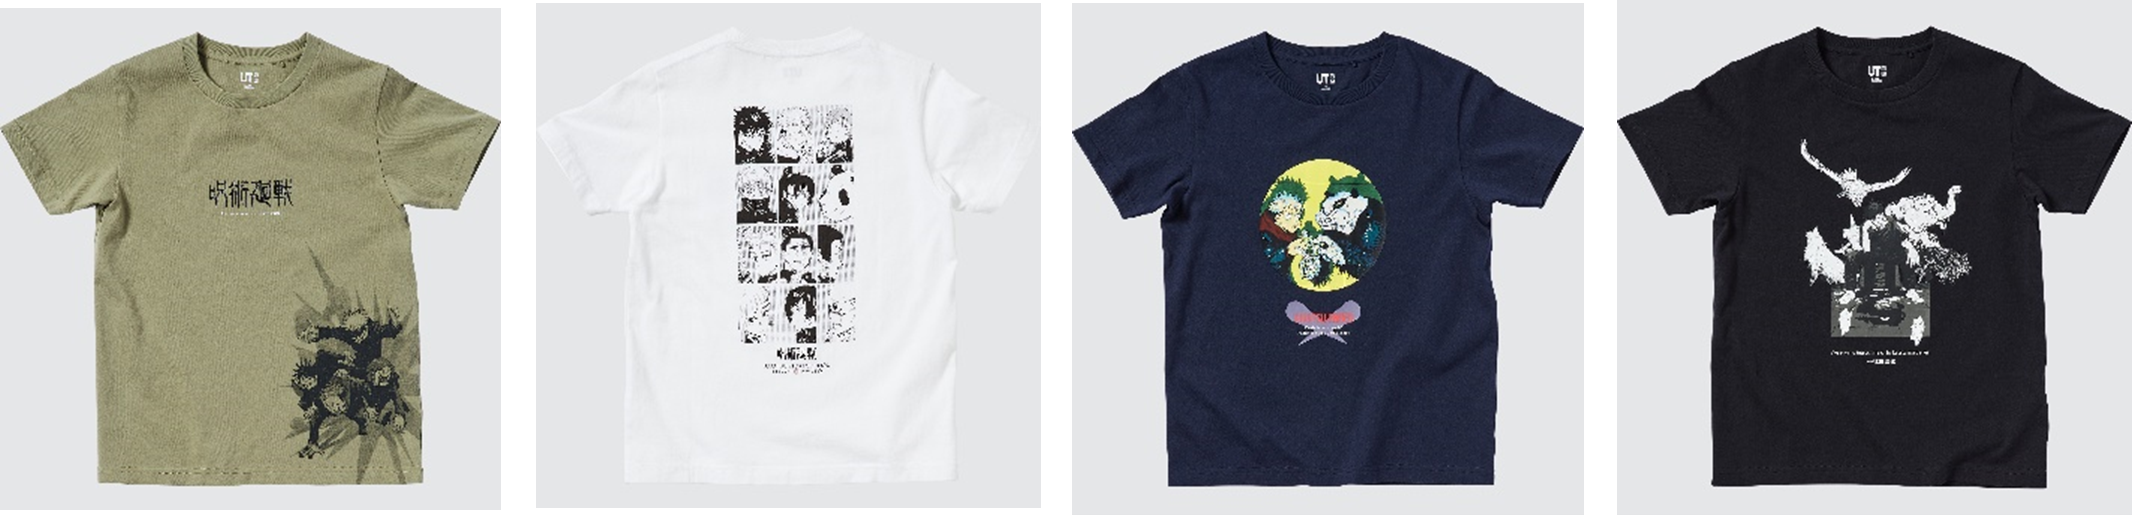 UNIQLOs second Jujutsu Kaisen UT collection is launching in late June   GEEKSPIN